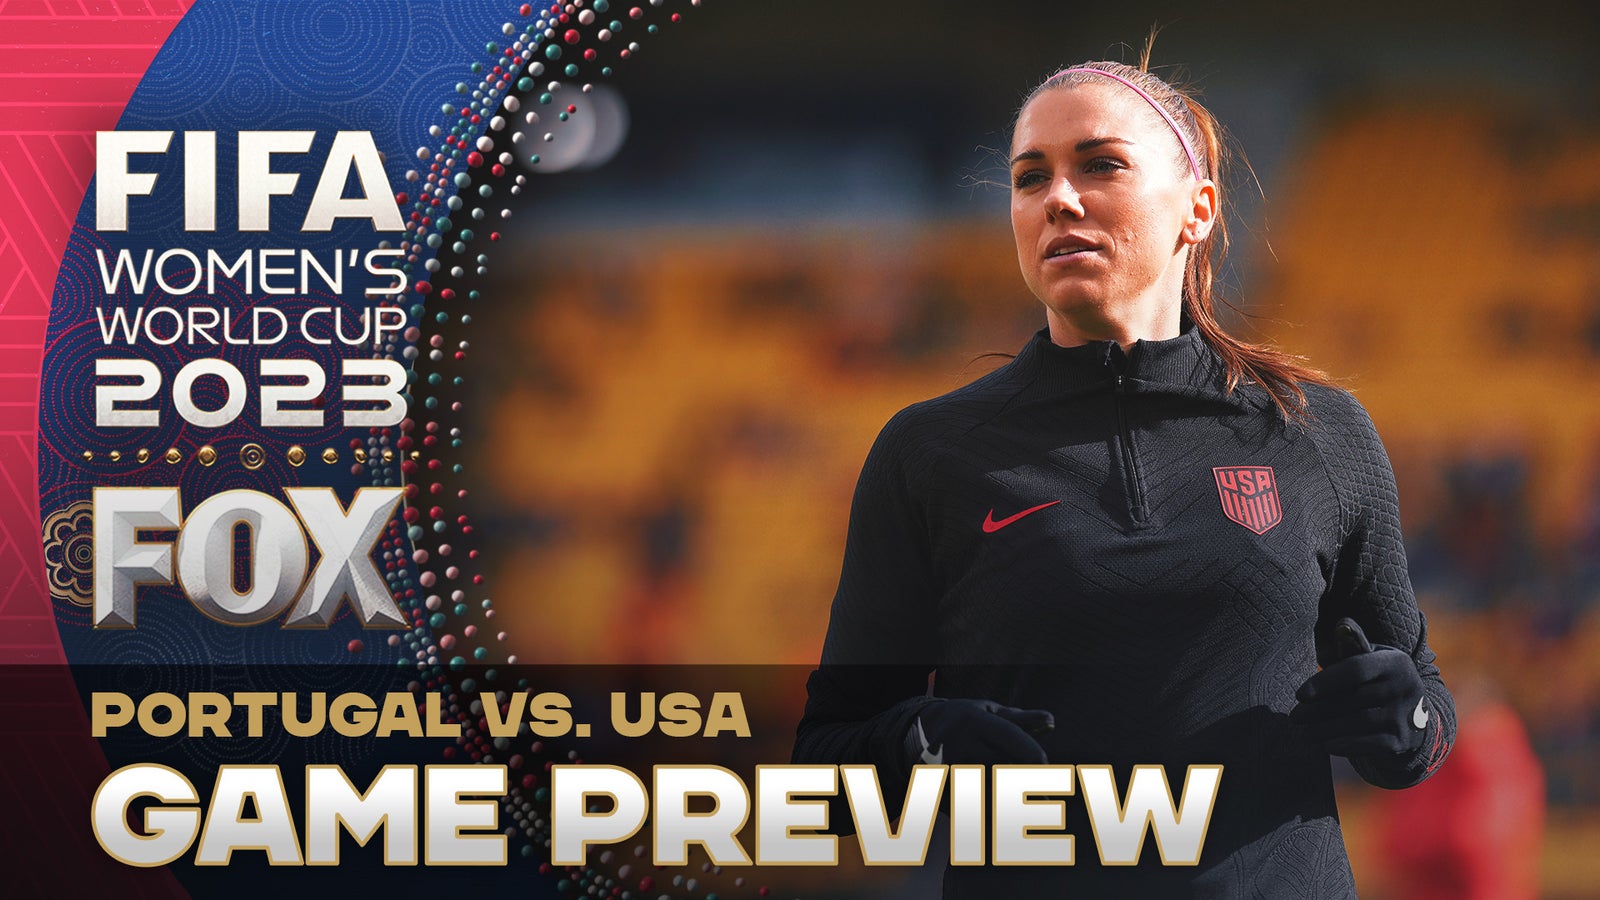 'This is a must win' - Carli Lloyd and Alexi Lalas discuss adjustments the USWNT needs to make vs. Portugal